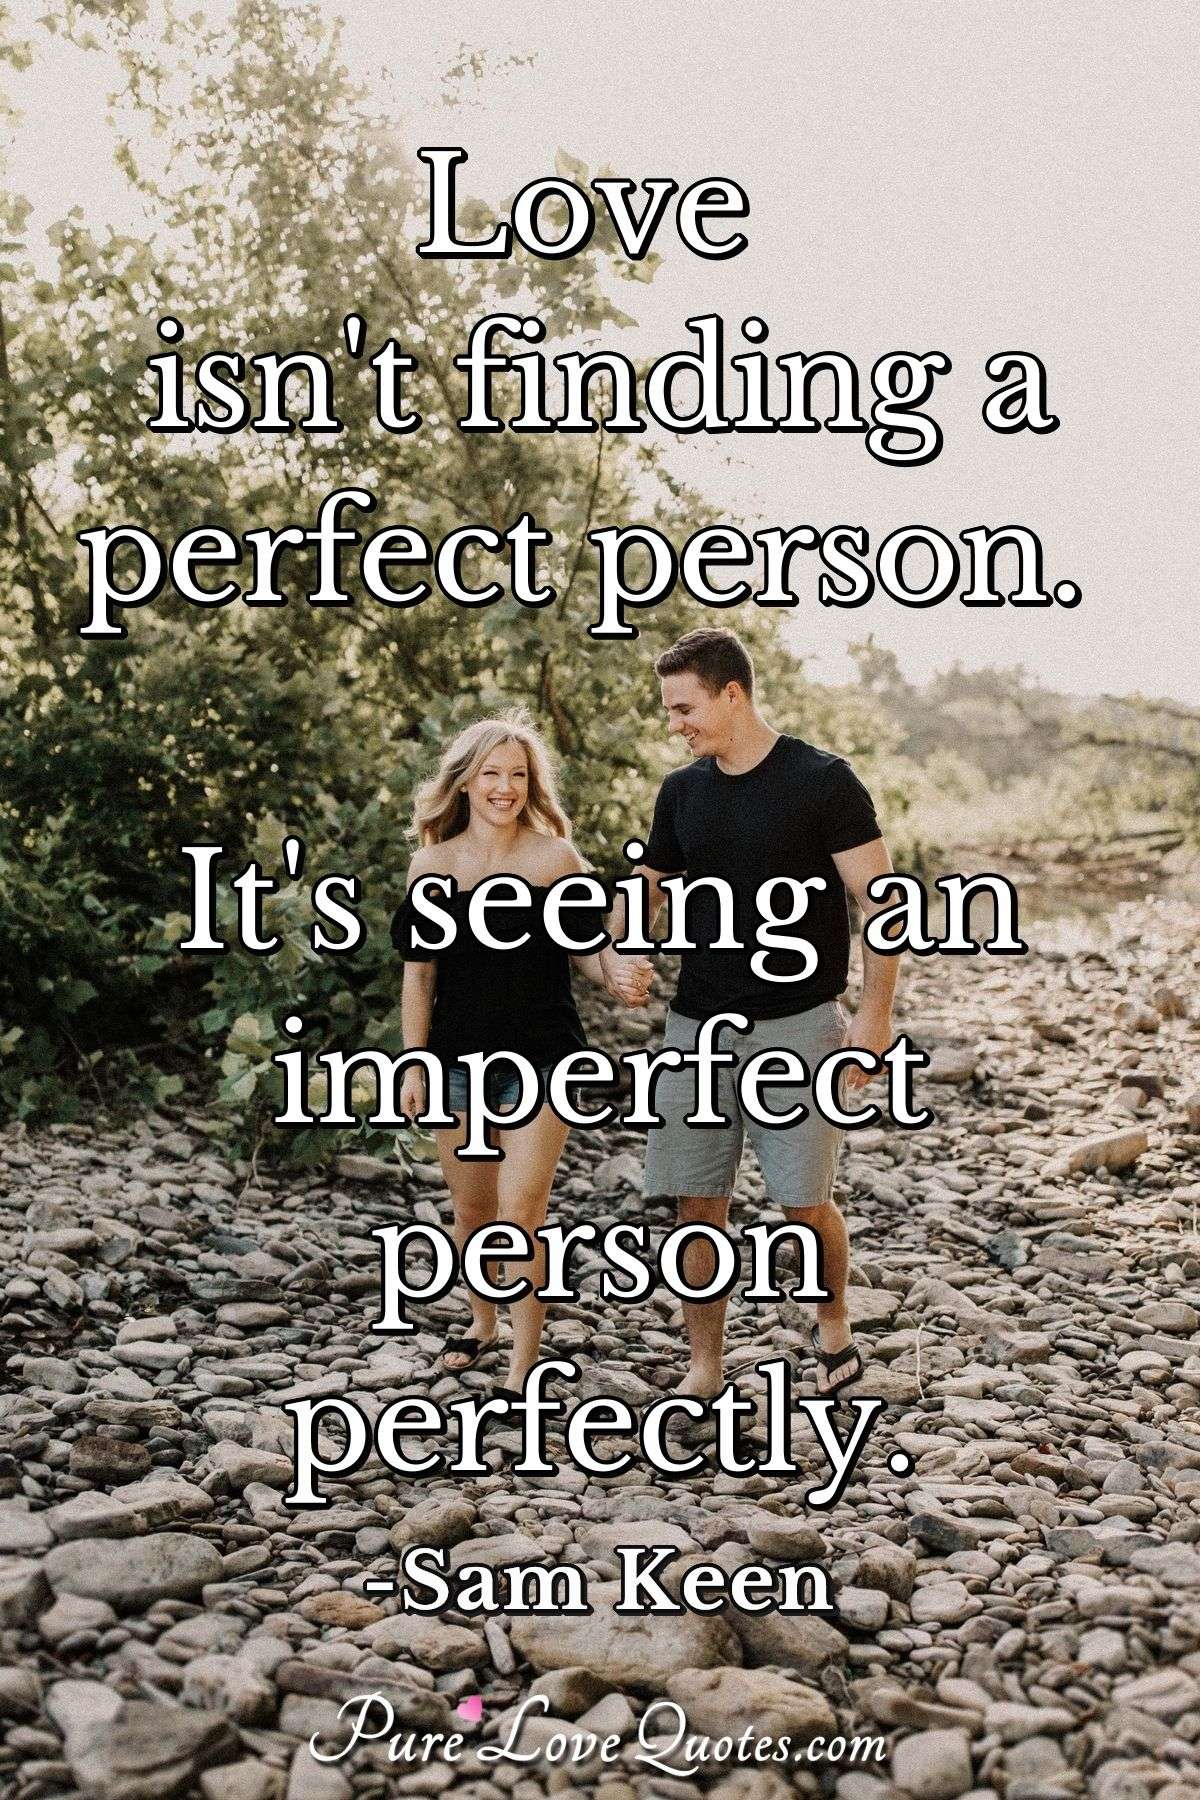 Love Isn't Finding A Perfect Person. It's Seeing An Imperfect Person Perfectly. | Purelovequotes